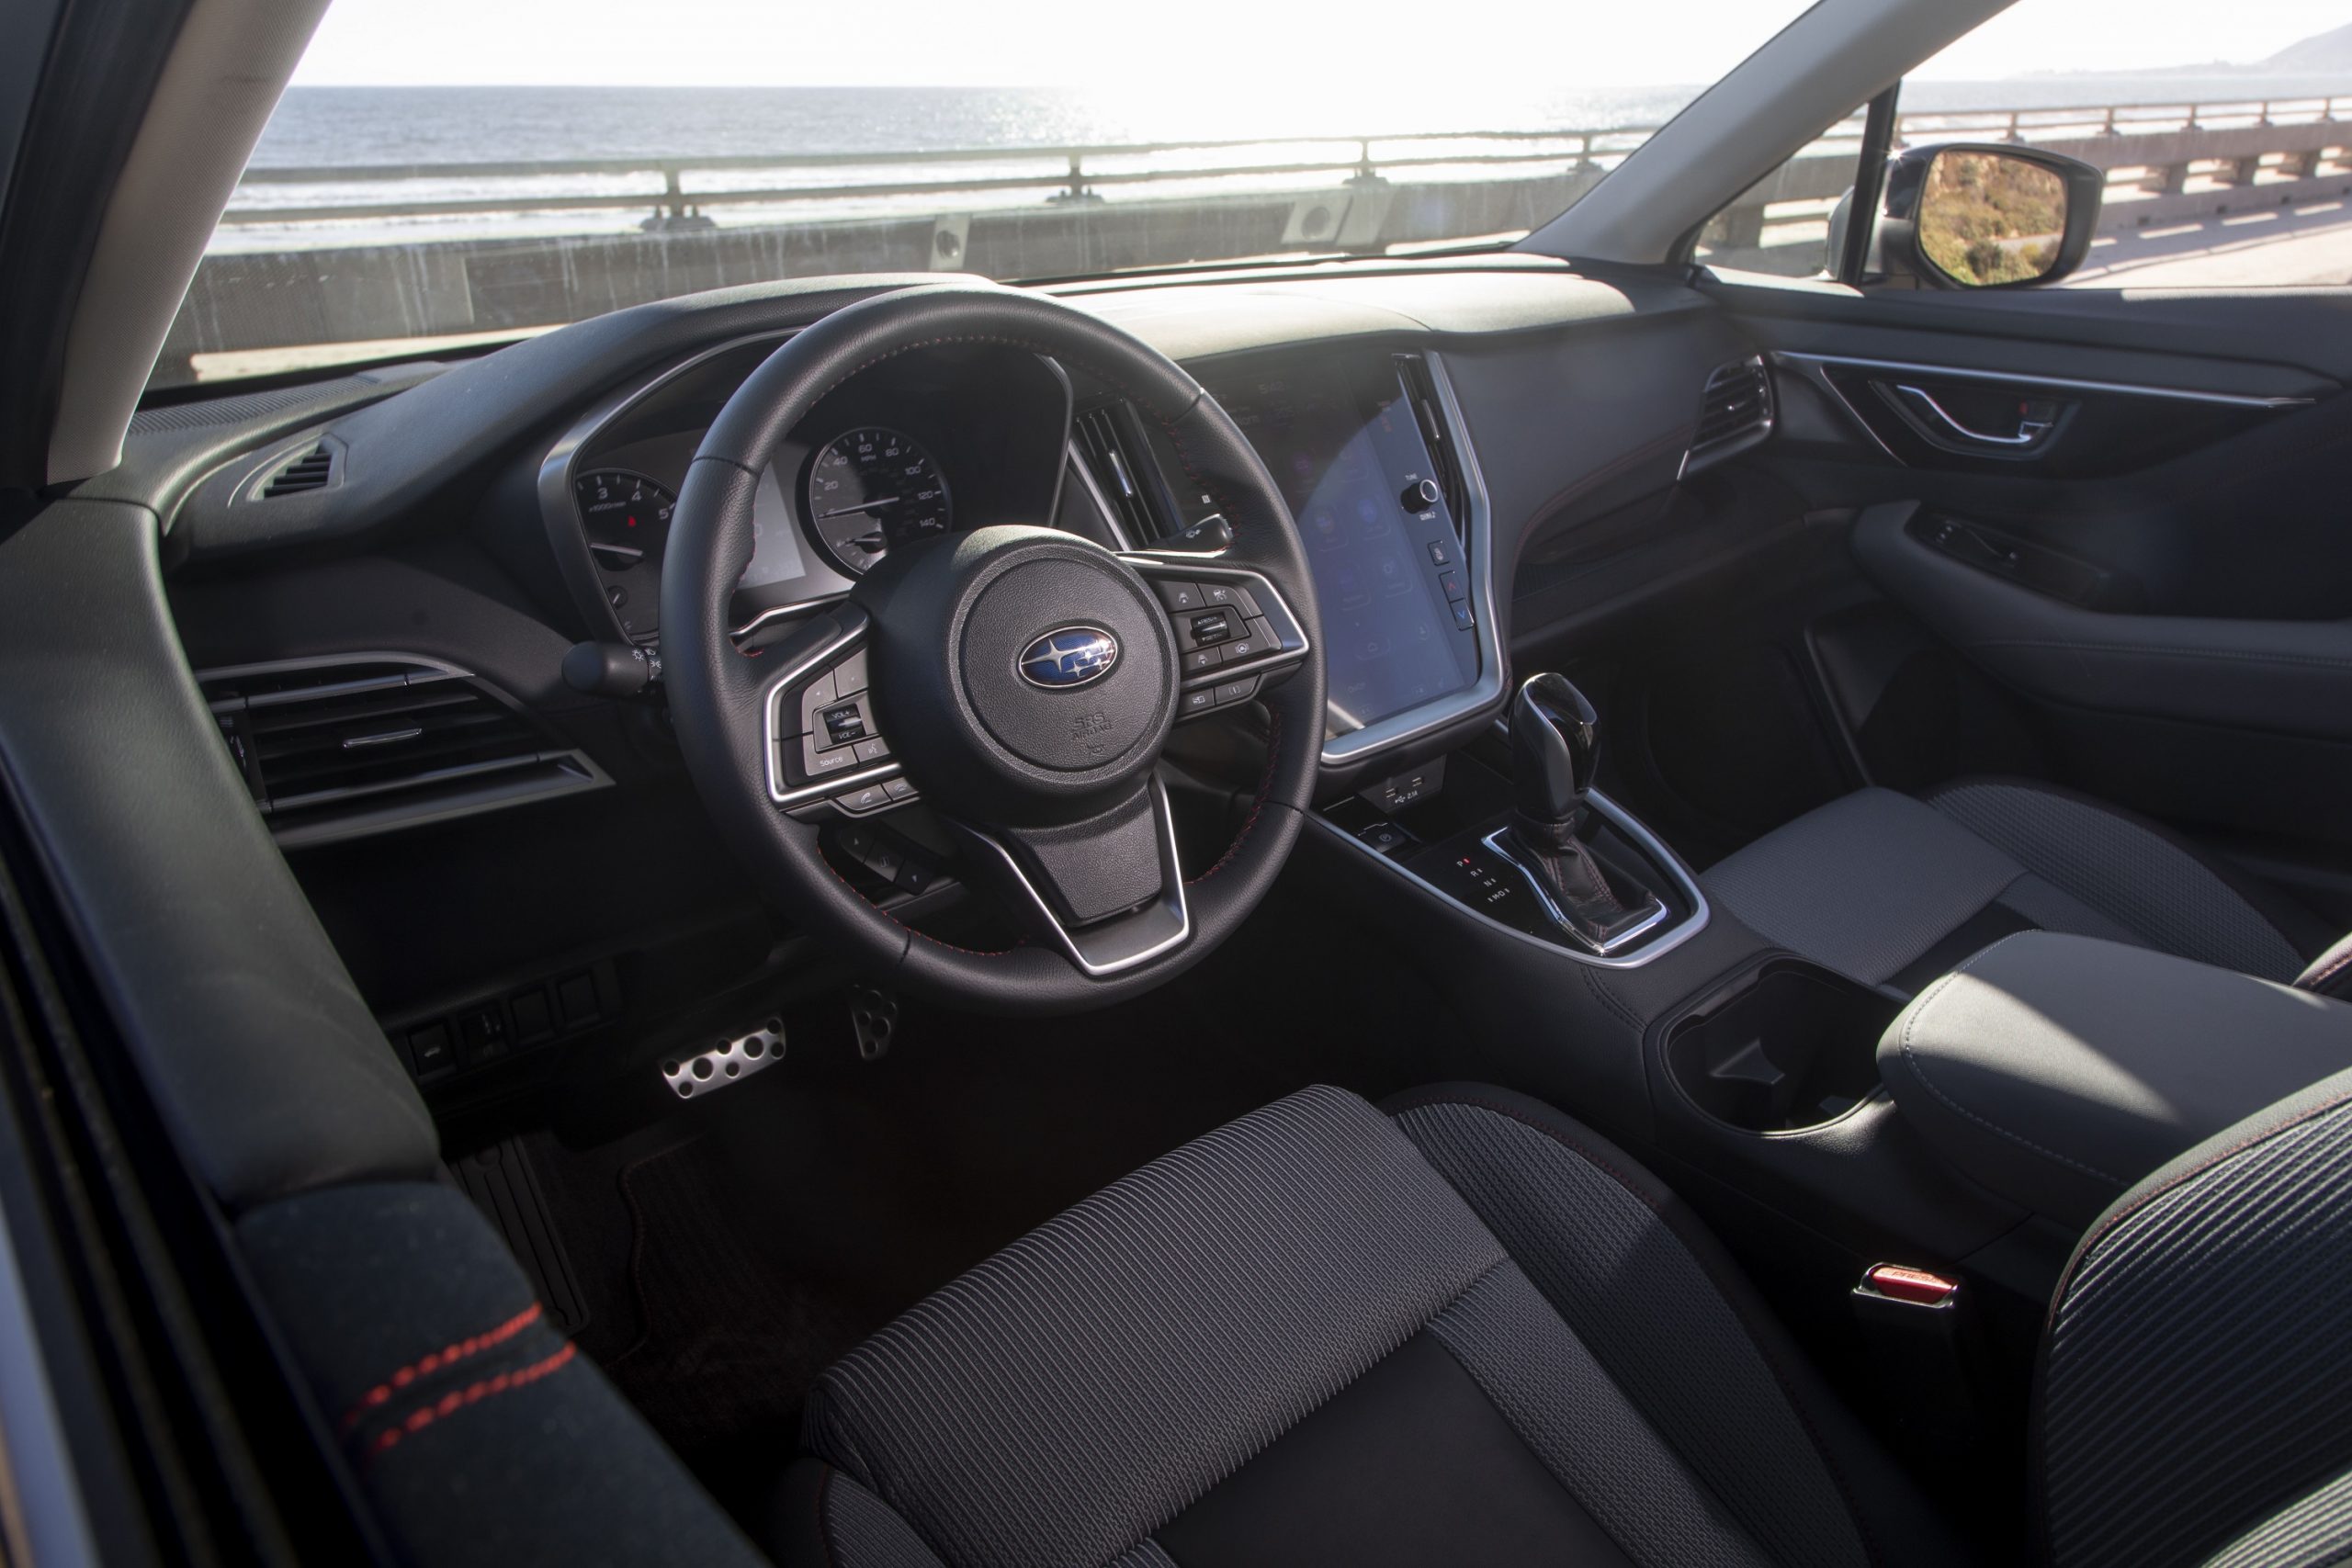 The interior of the 2022 Subaru Legacy with black cloth seats